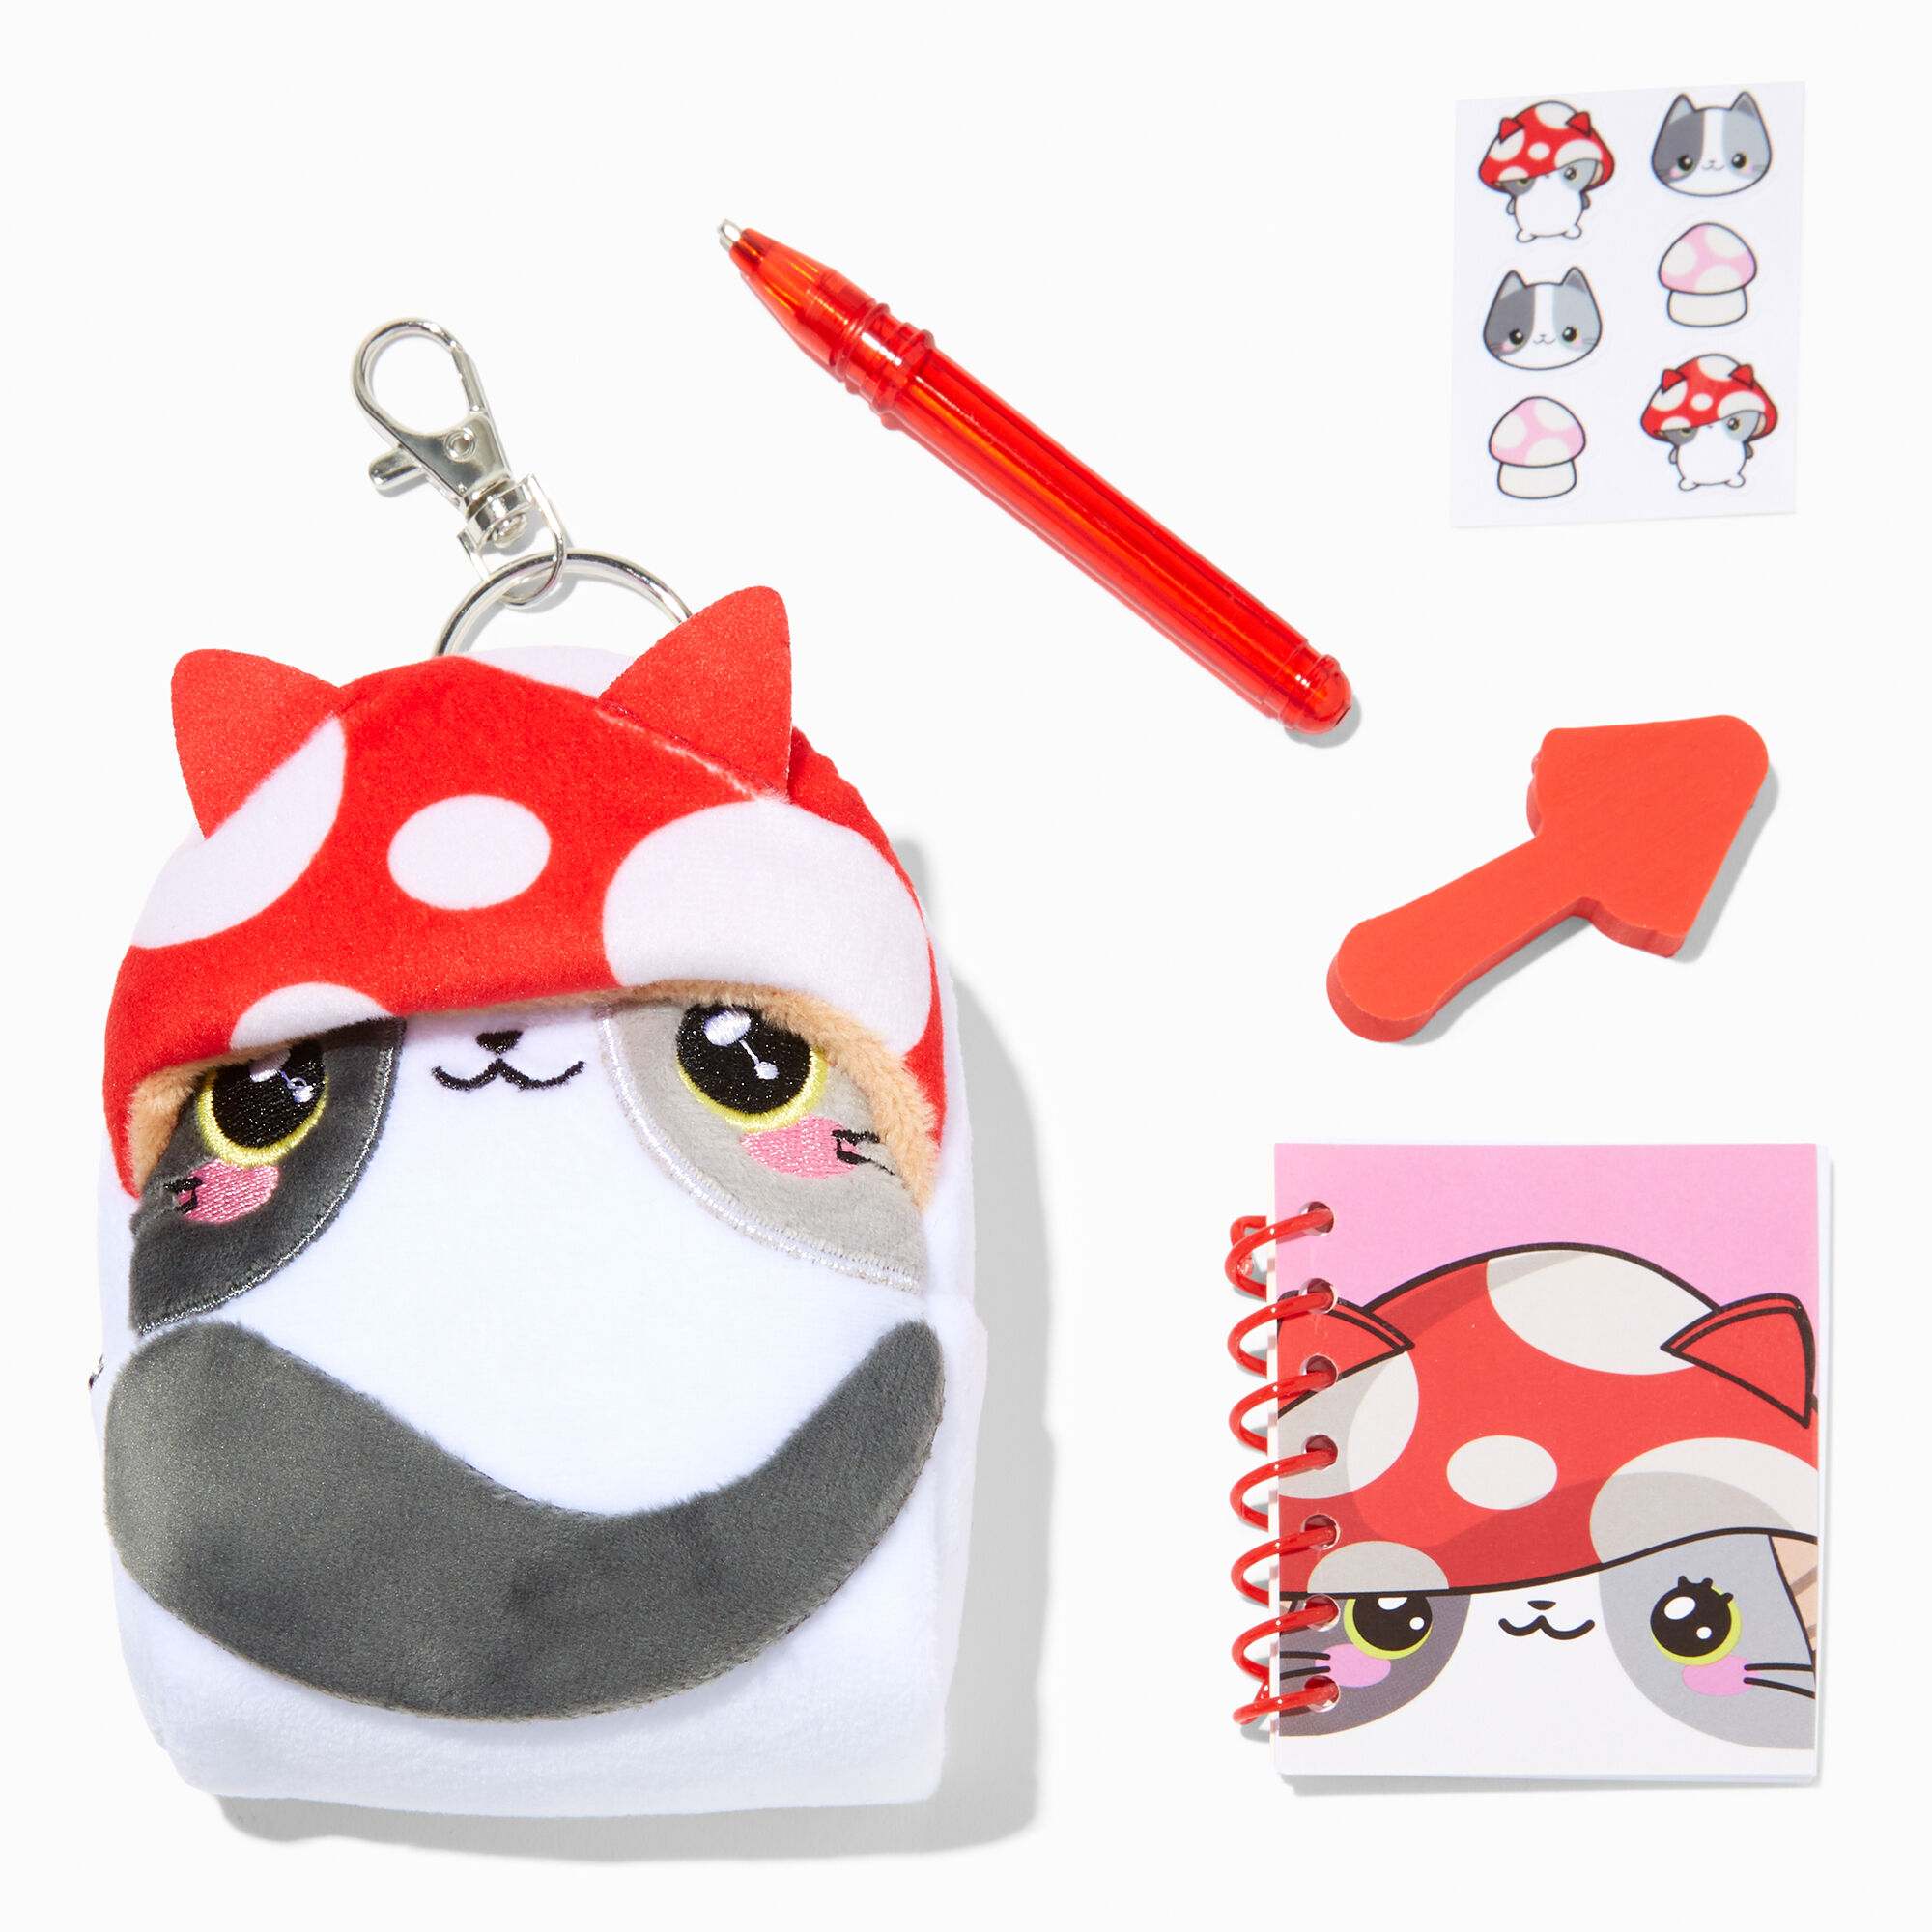 View Claires Mushroom Cat 4 Backpack Stationery Set information